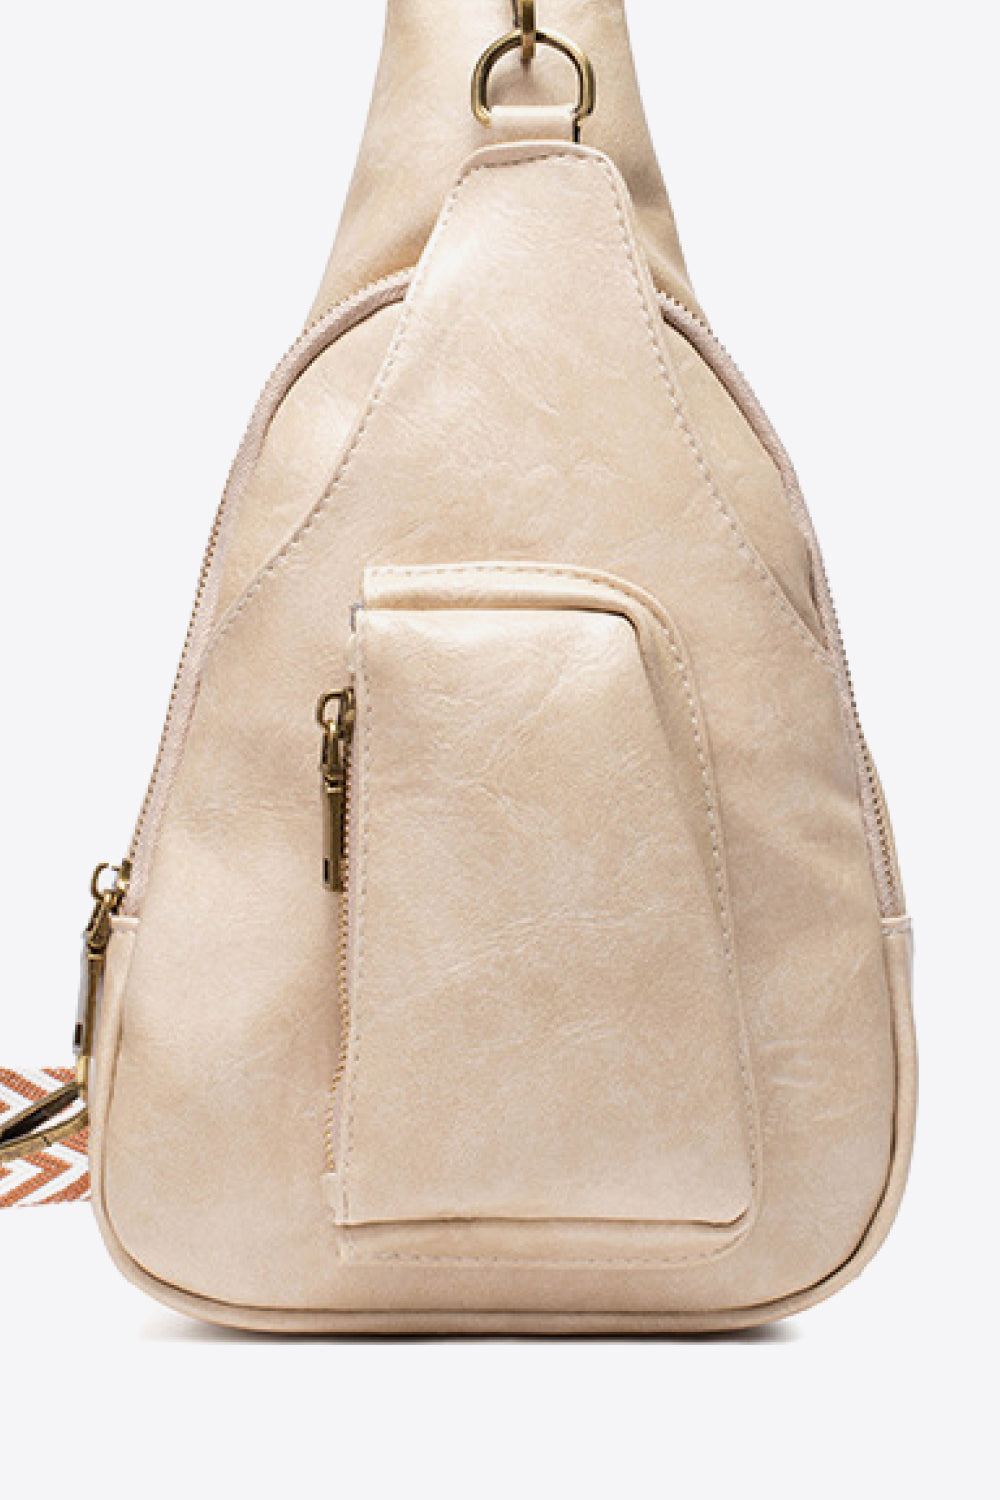 All The Feels PU Leather Sling Bag - AllIn Computer